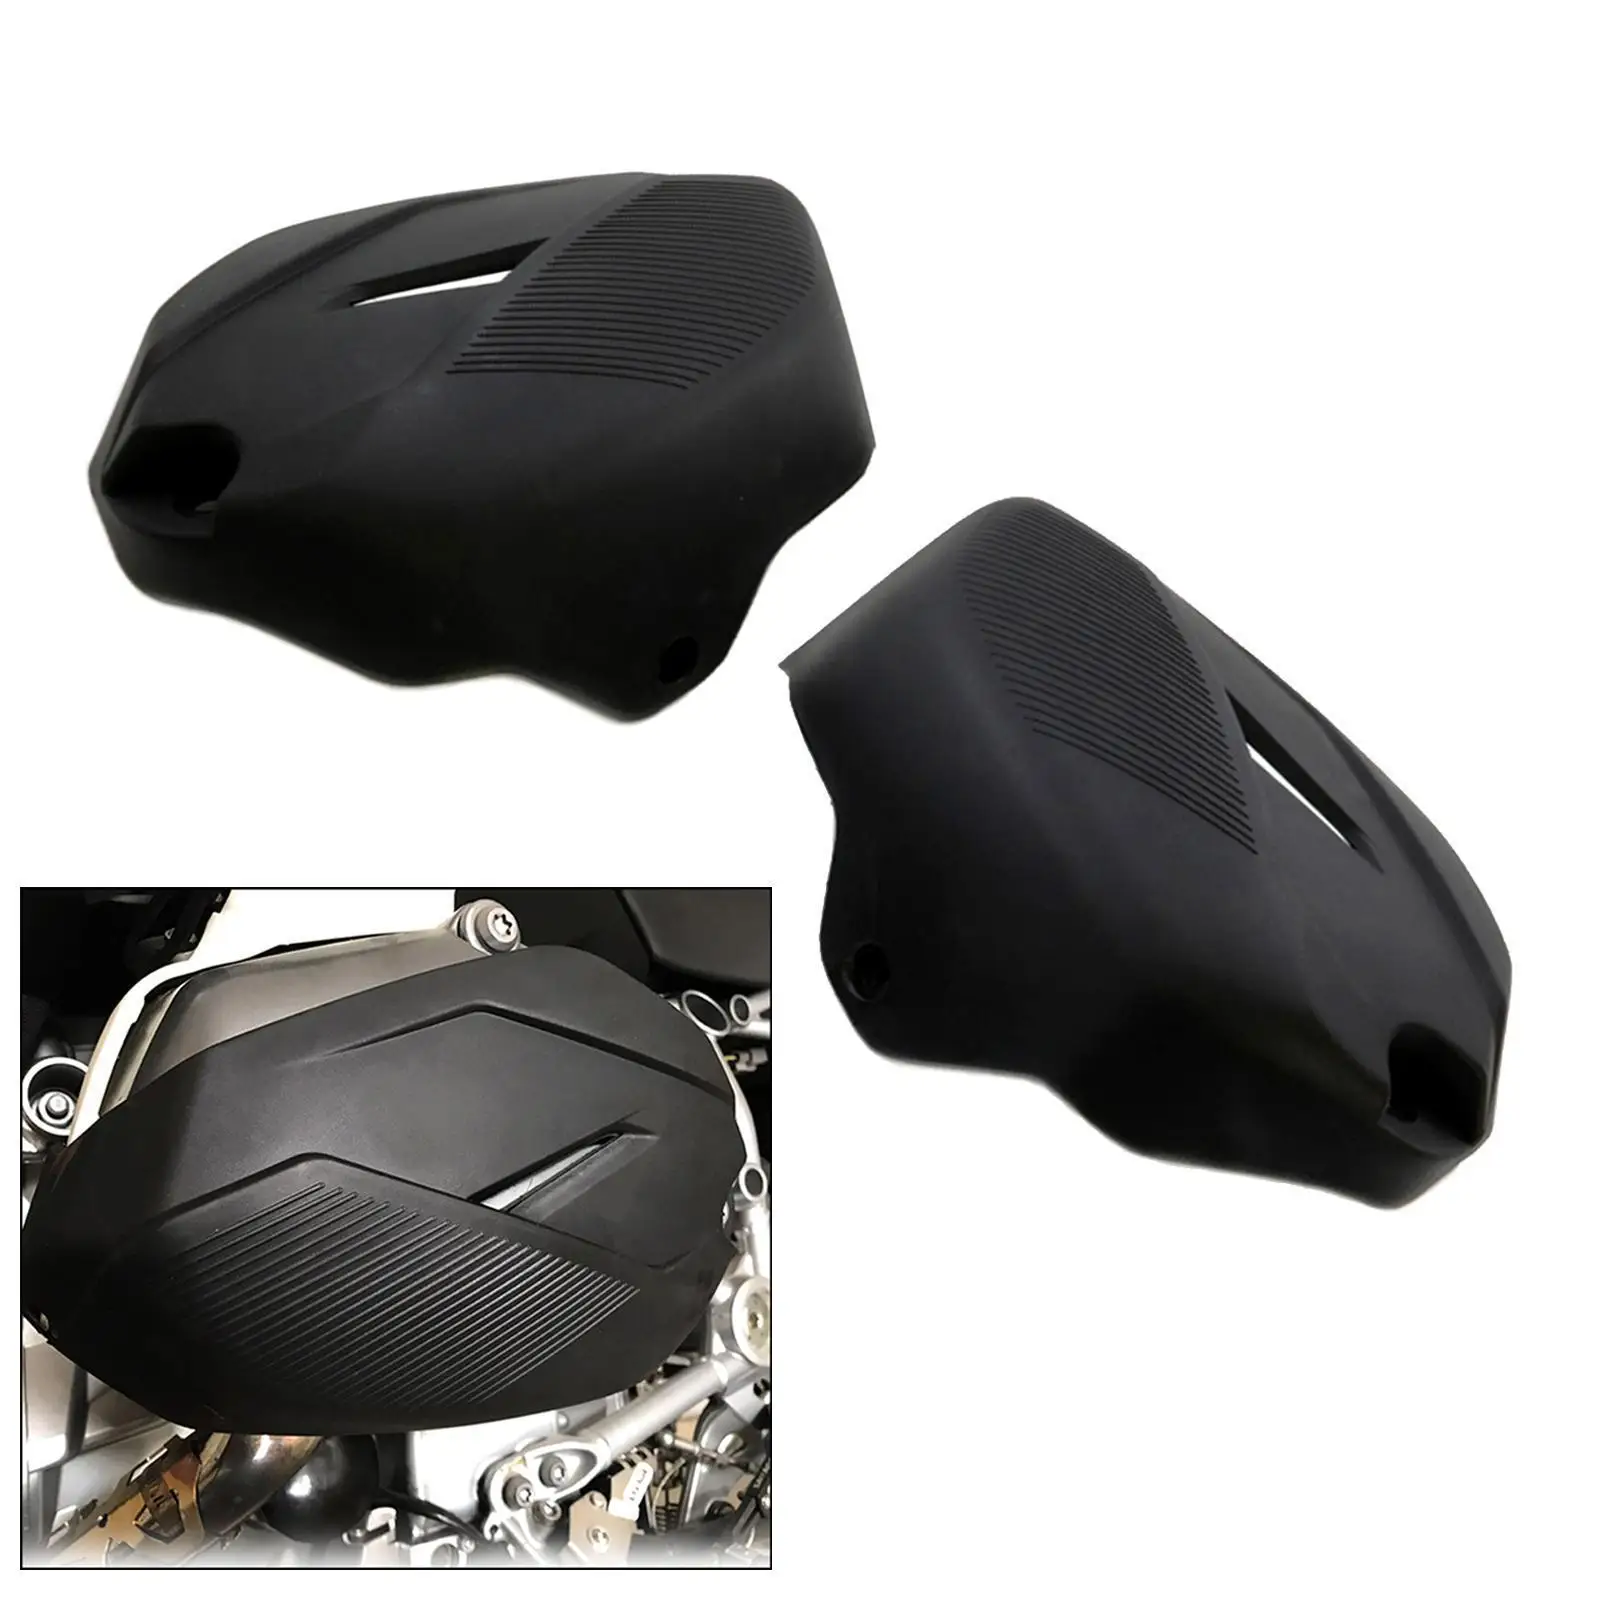 2Pcs Motorcycle Cylinder Head Engine Guards Cover For BMW R1200GS LC ADV